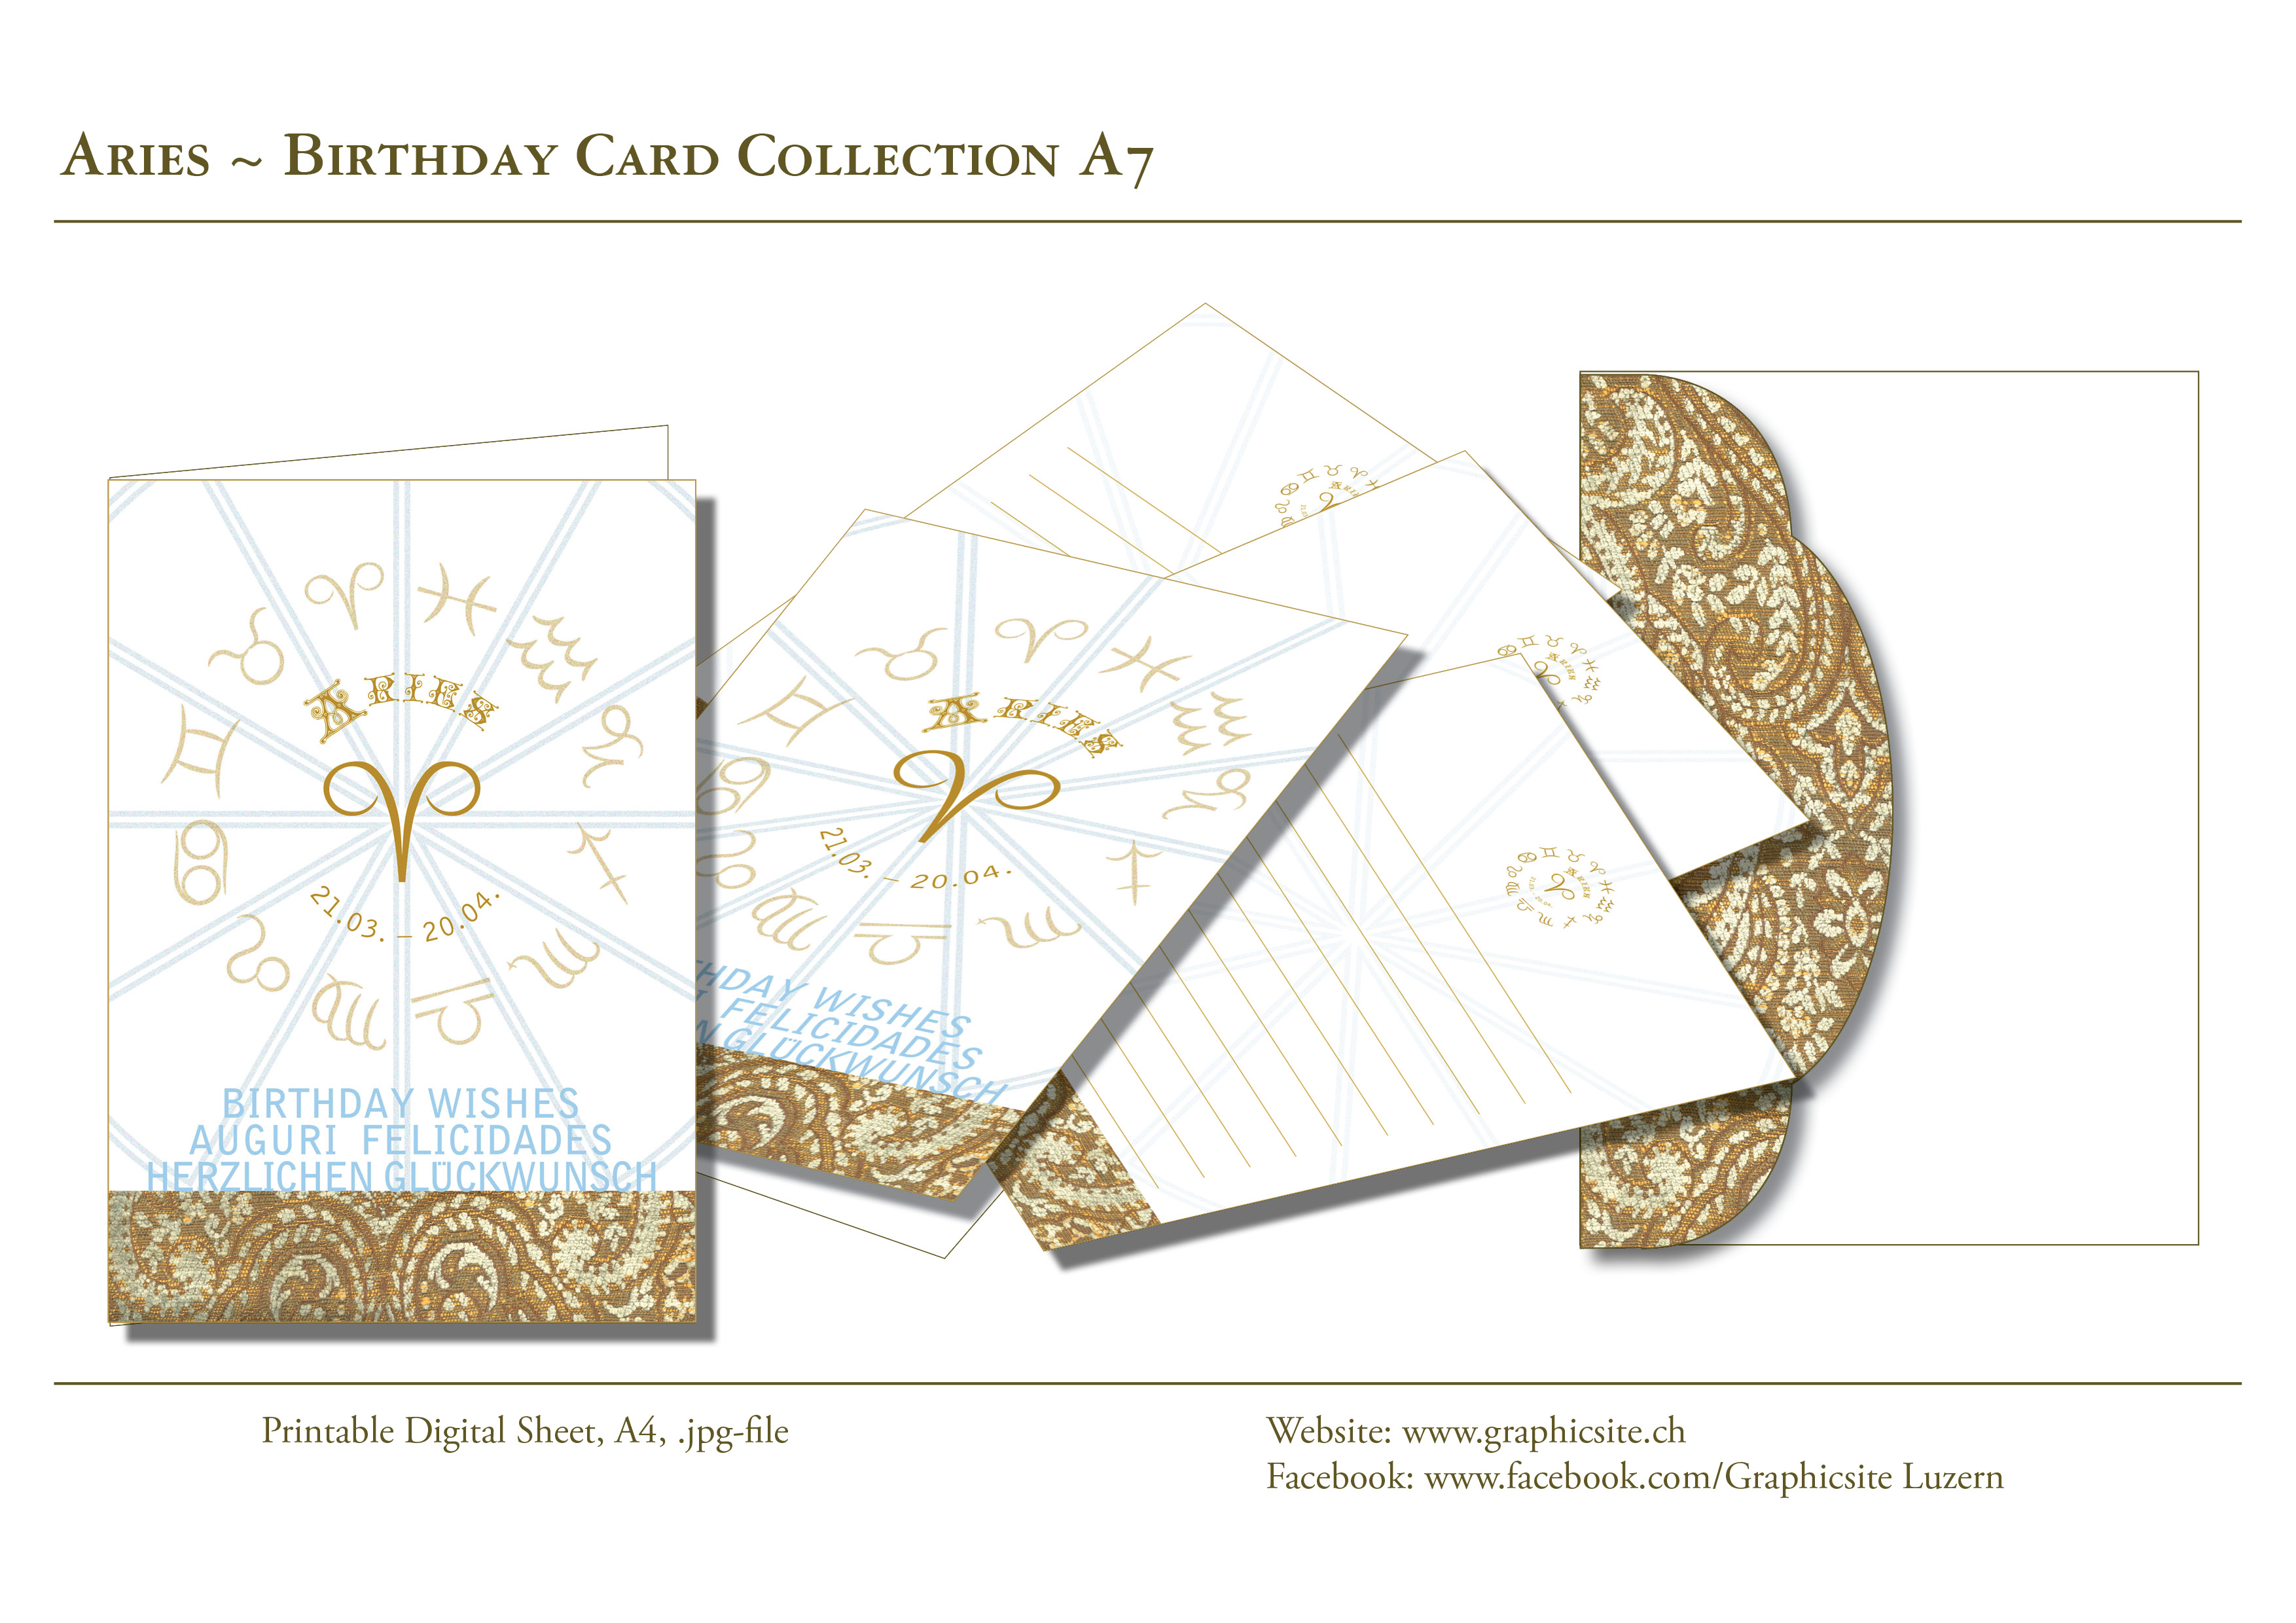 Printable Digital Sheets - Birthday Card Collection - Horoscope - Zodiac - Aries A7 - GraphicDesign, Luzern